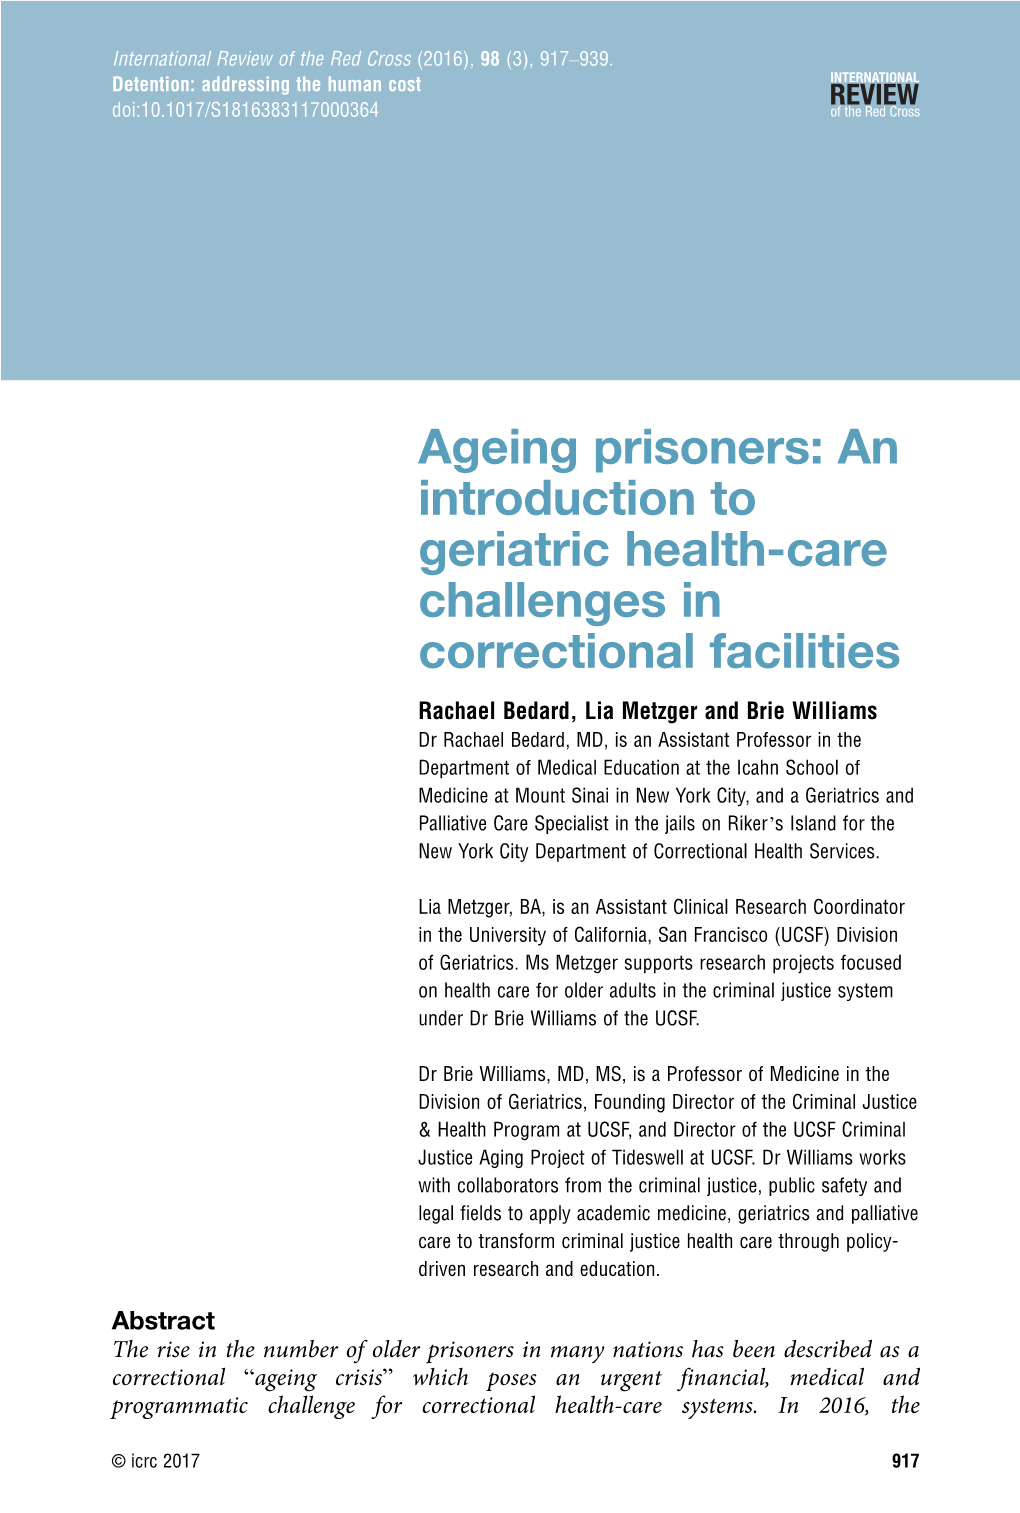 Ageing Prisoners: an Introduction to Geriatric Health-Care Challenges In